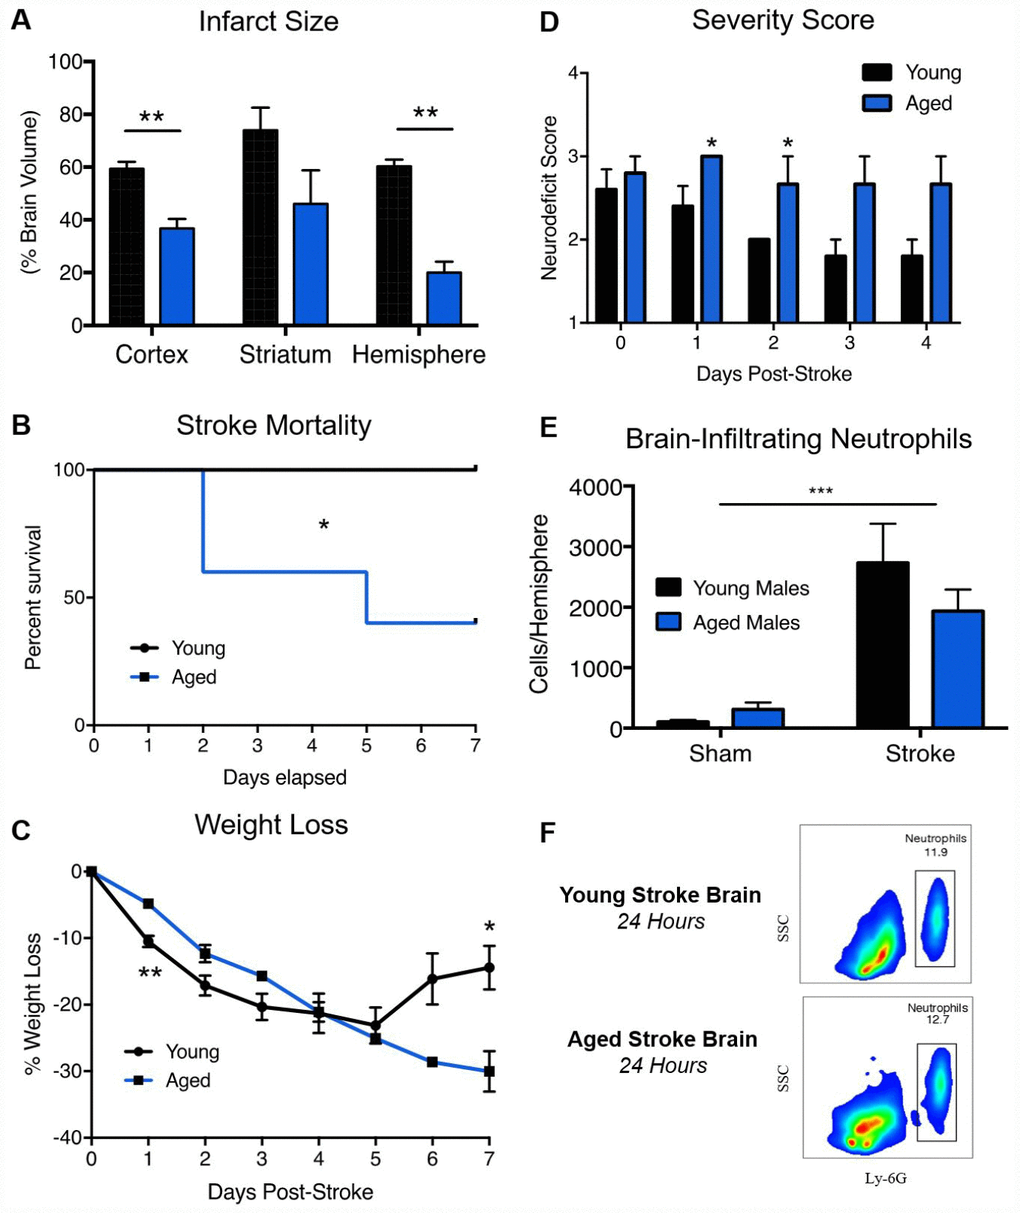 Aged animals experience smaller infarcts, poorer neurological deficits and equivalent neutrophil infiltration than young animals following ischemic stroke. Young (3 month) and aged (24 month) mice were subjected to 60-minute MCAO. (A) Infarct volumes by TTC 24 hours post-stroke, n=7-11/group, presented as mean +/- SEM. (B) Stroke mortality rates, n=5/group, (C) Weight loss as a % of starting weight, n=5/group (D) Neurodeficit scores, n=5/group. (E) Absolute quantification of brain-infiltrating neutrophils in sham and stroke animals 24 hours after stroke onset, (F) Representative flow plots. SSC=Side Scatter. n=3/sham group, 4/stroke group. *p≤0.05, **p=